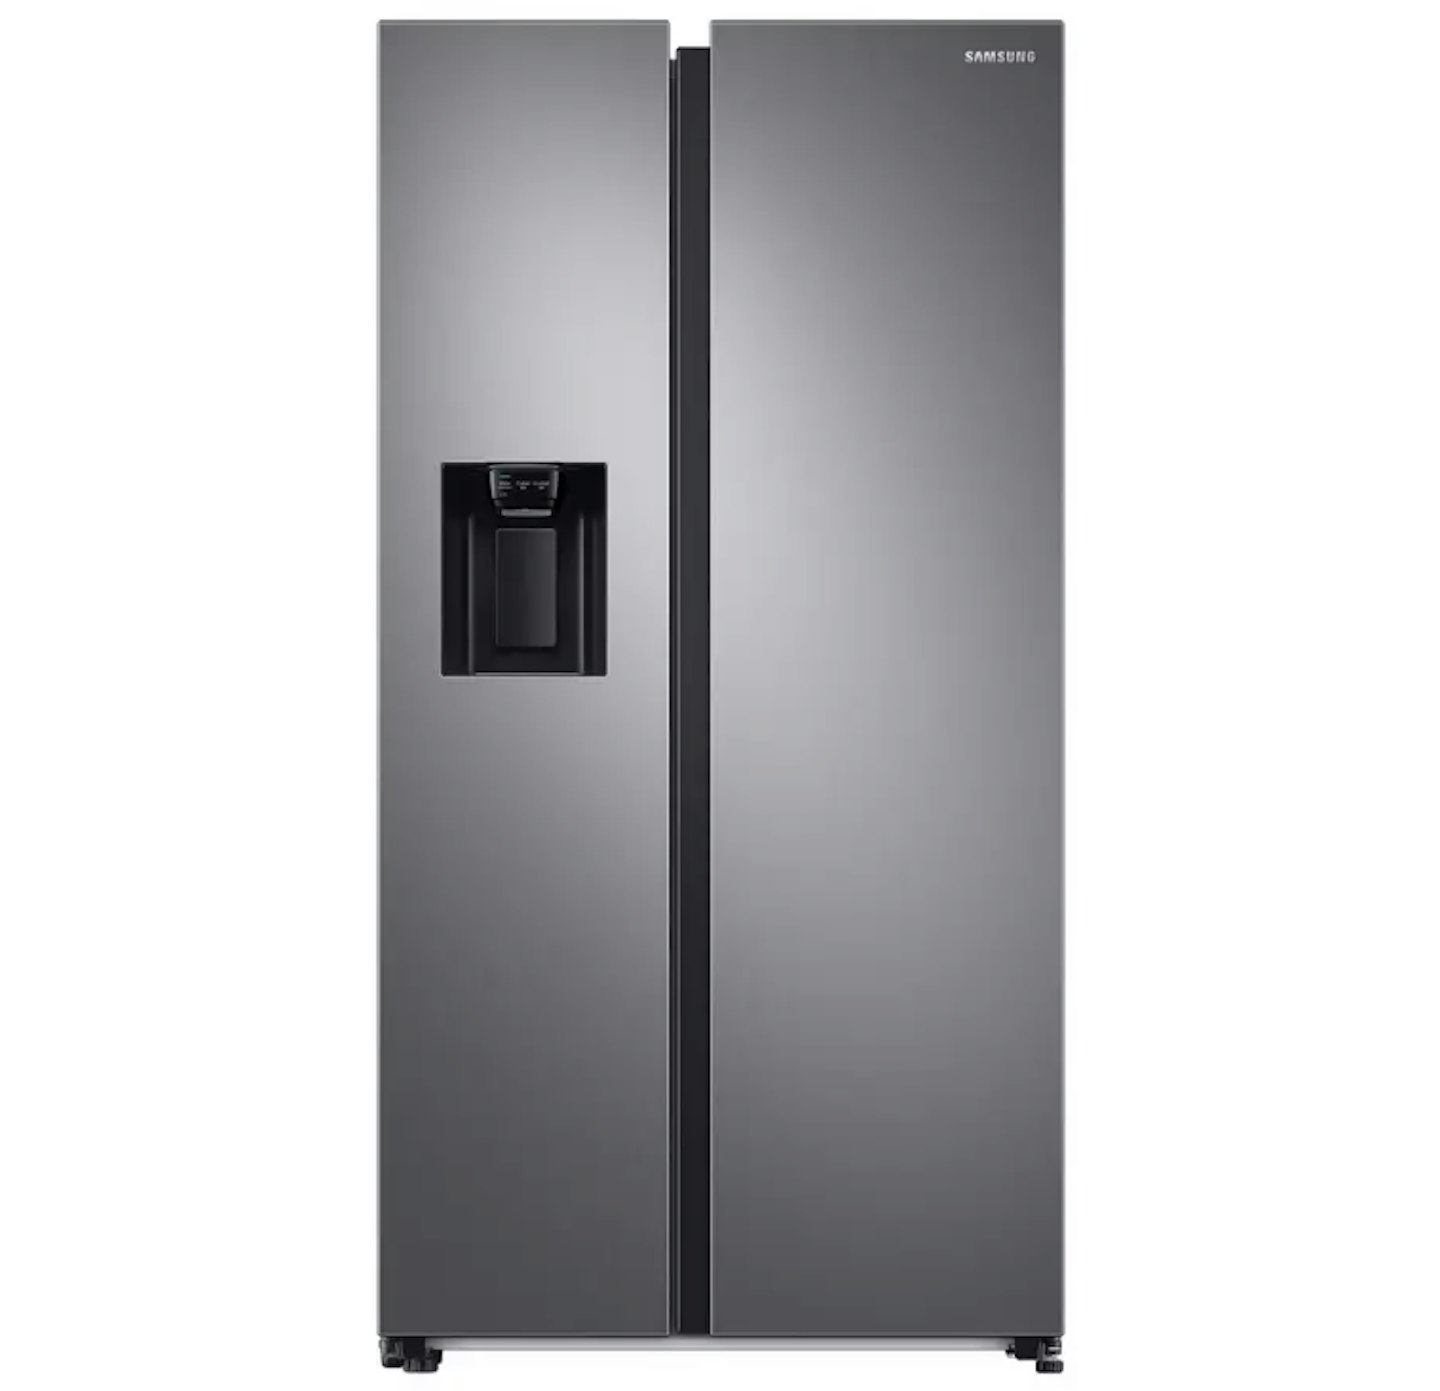 Samsung RS68A8830S9 American Fridge Freezer Stainless Steel